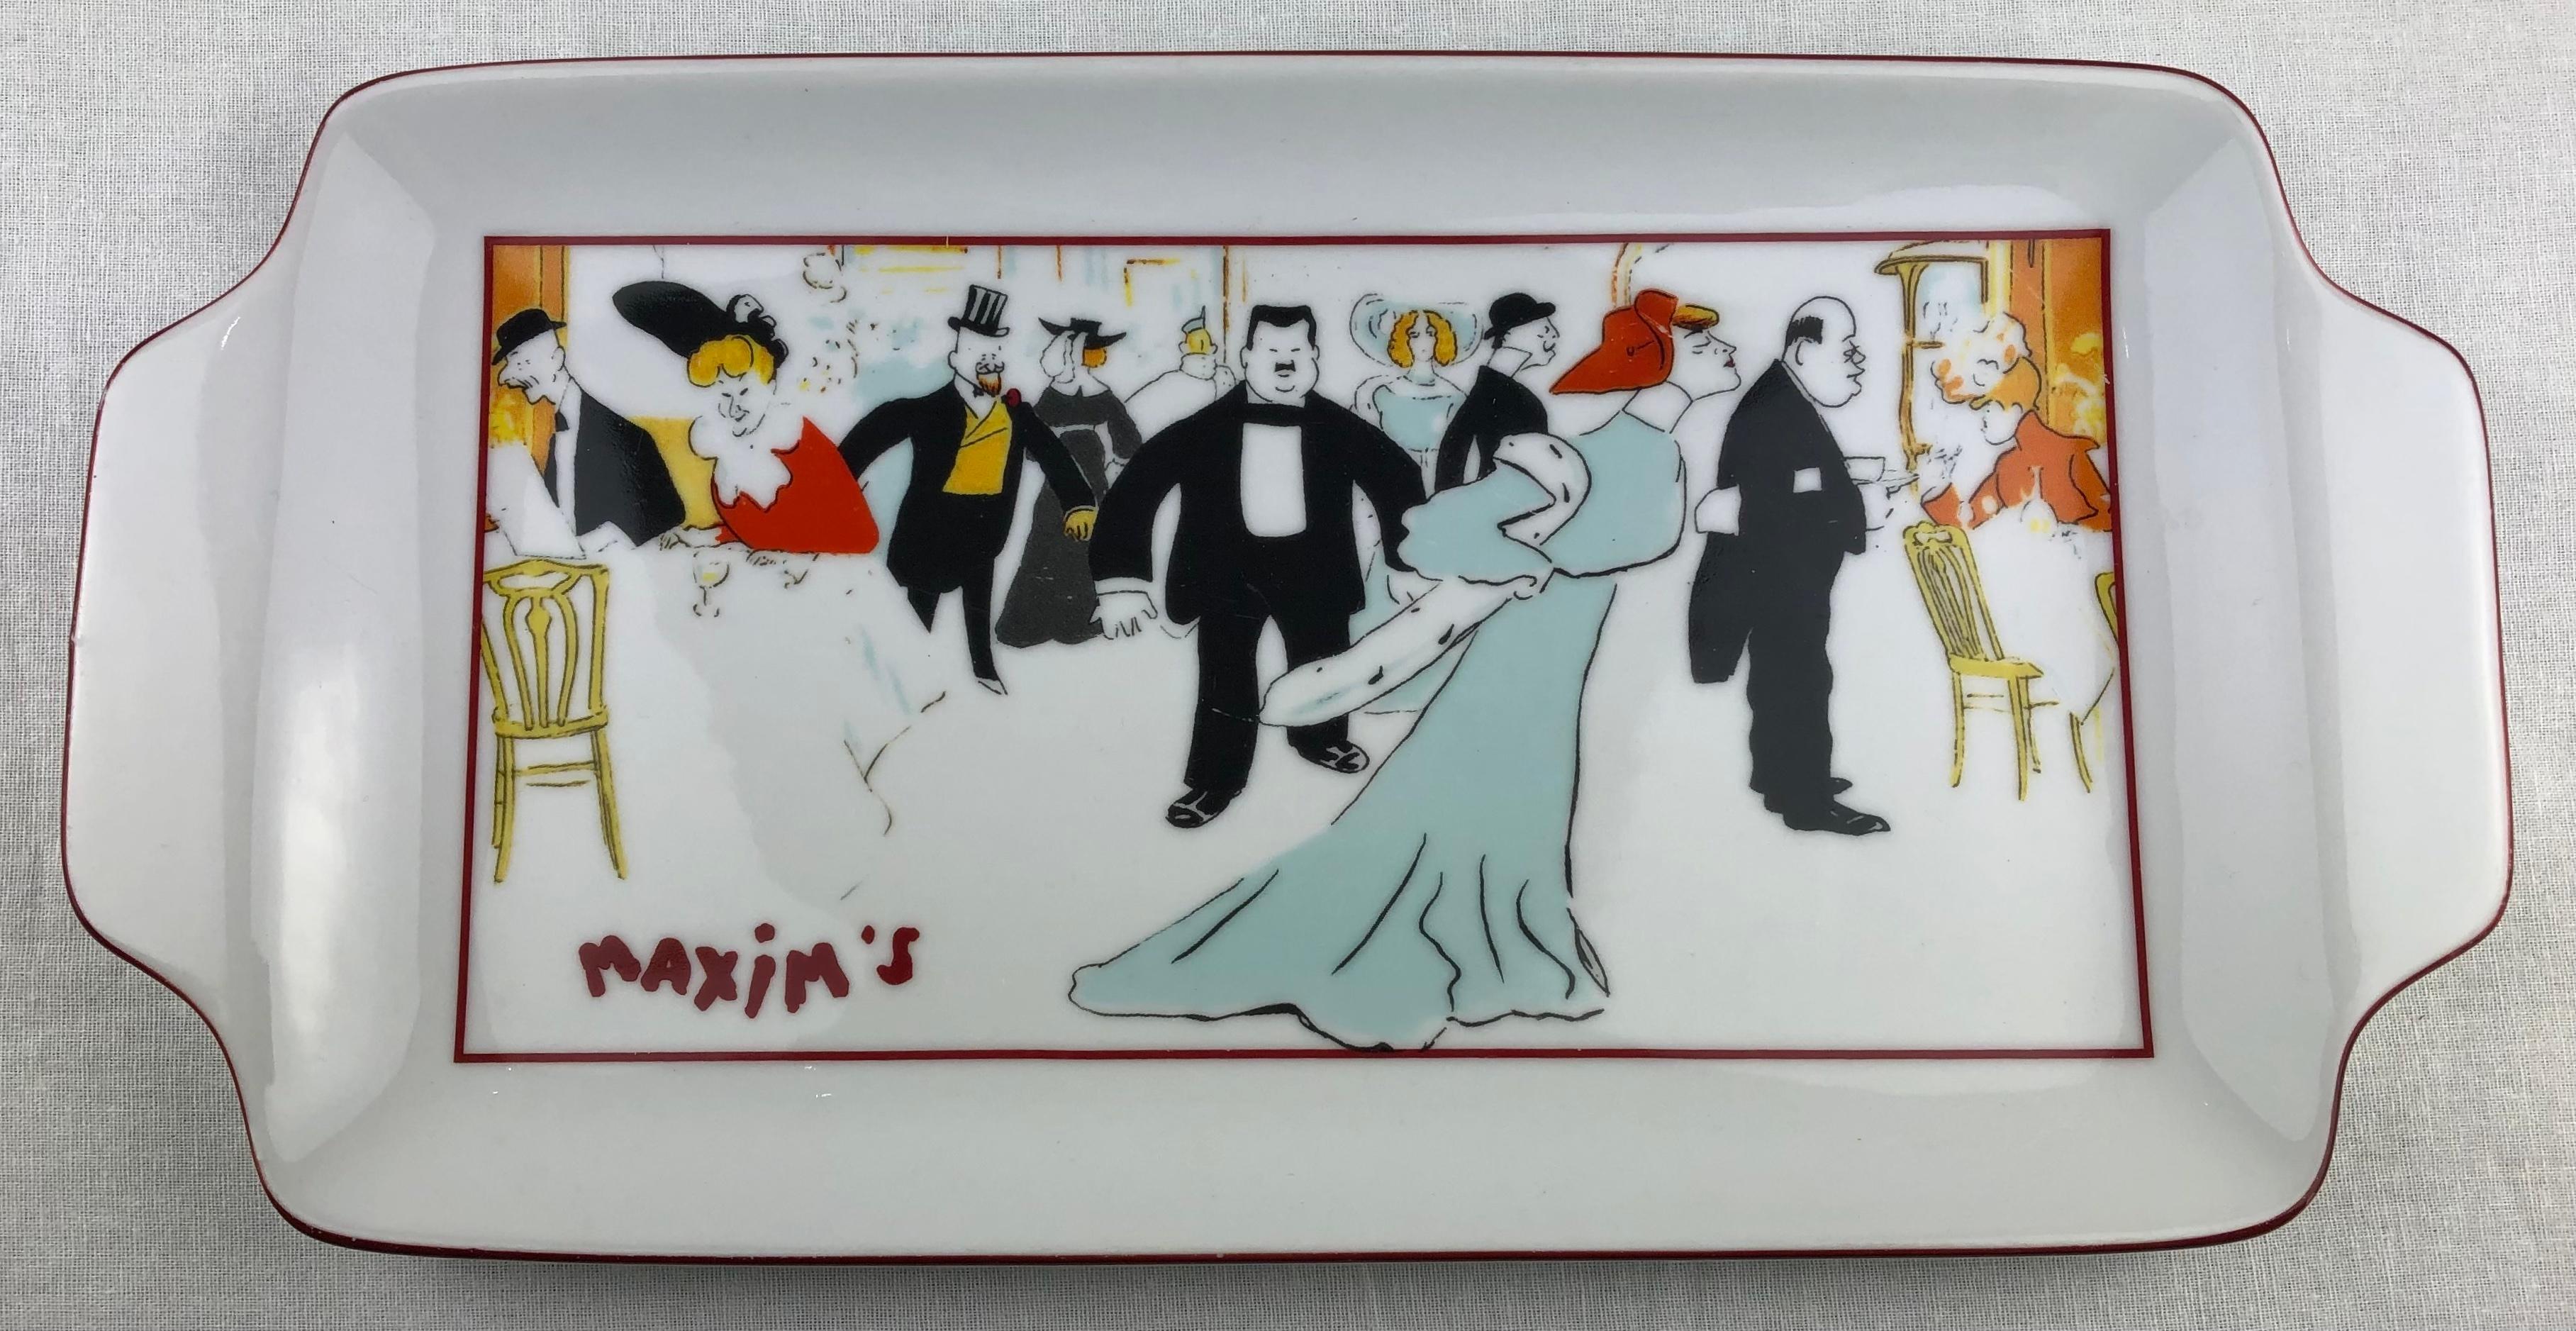 Vintage Glazed Porcelain Tray or Dish from Maxim's Paris France In Good Condition For Sale In Miami, FL